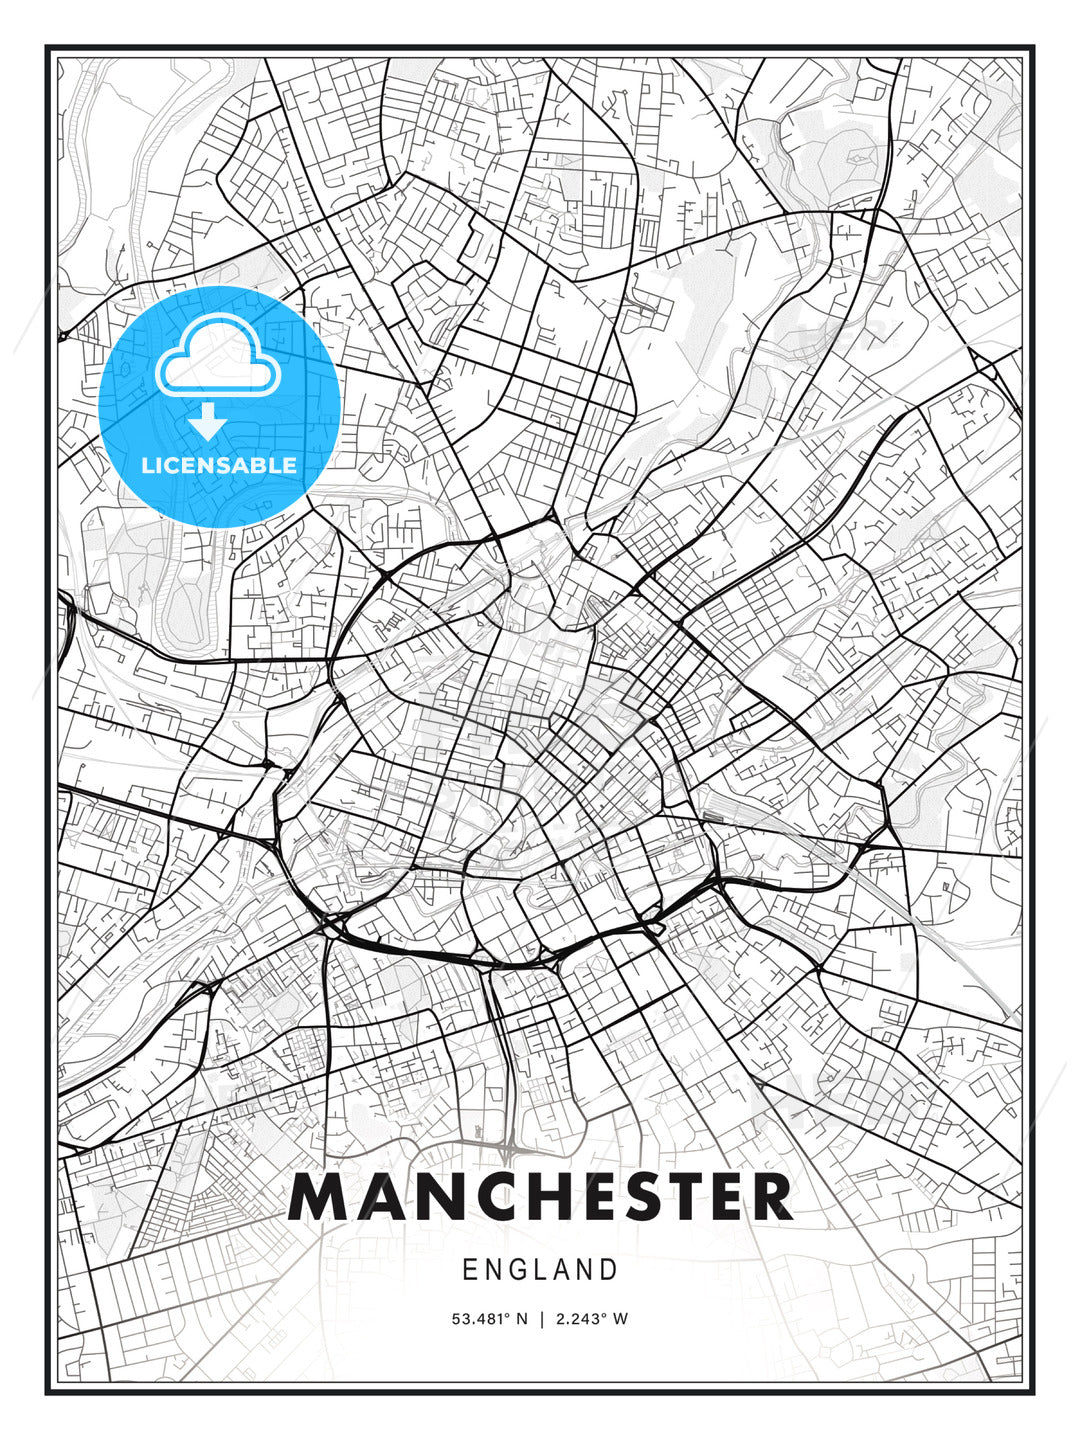 Manchester, England, Modern Print Template in Various Formats - HEBSTREITS Sketches